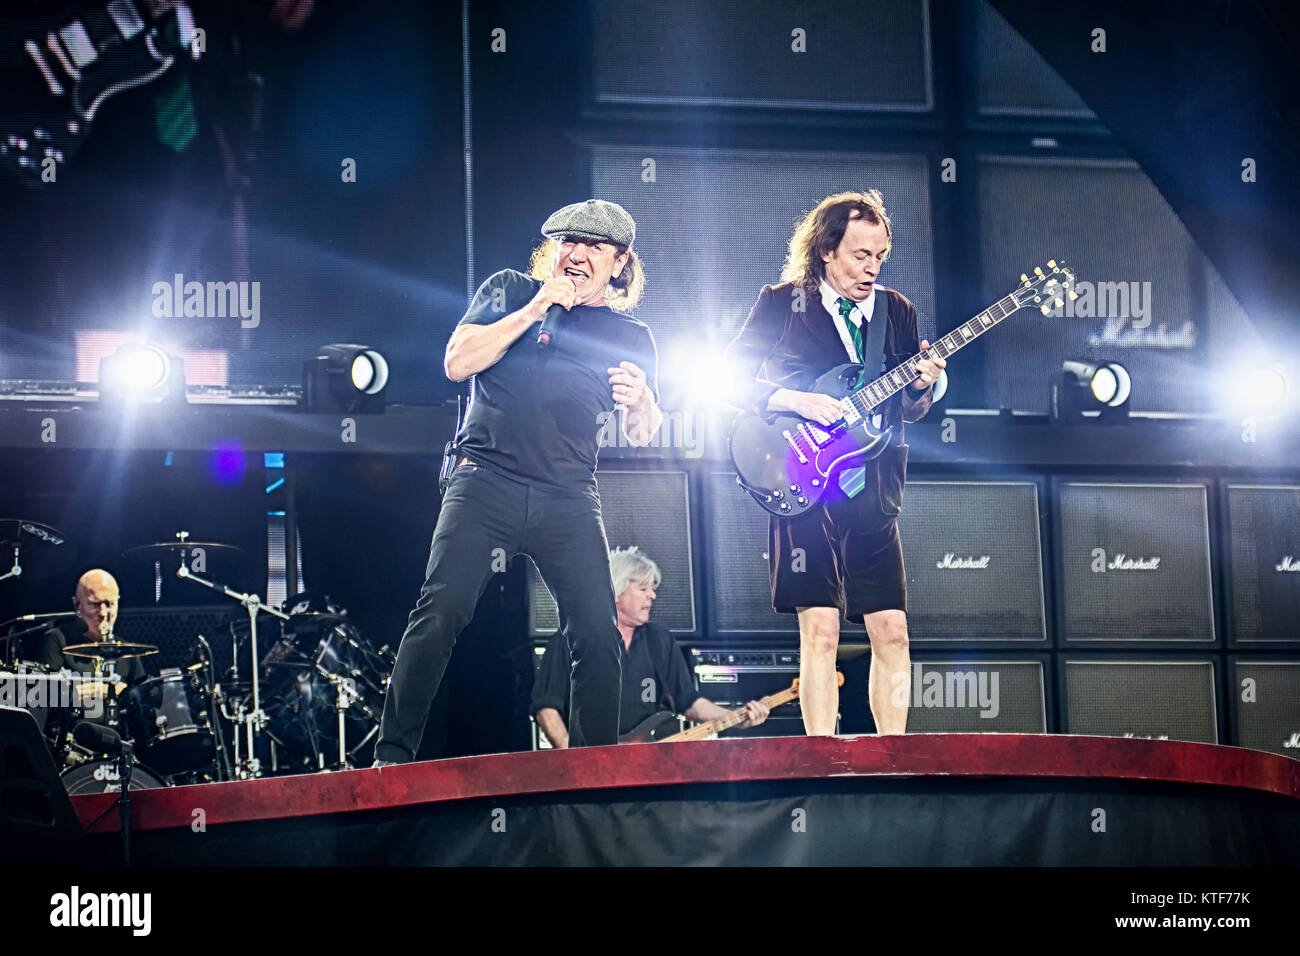 The Australian rock band AC/DC performs a live concert at Valle Stadion in Oslo as part of the or Bust World 2015 Here musician and guitarist Young (R)